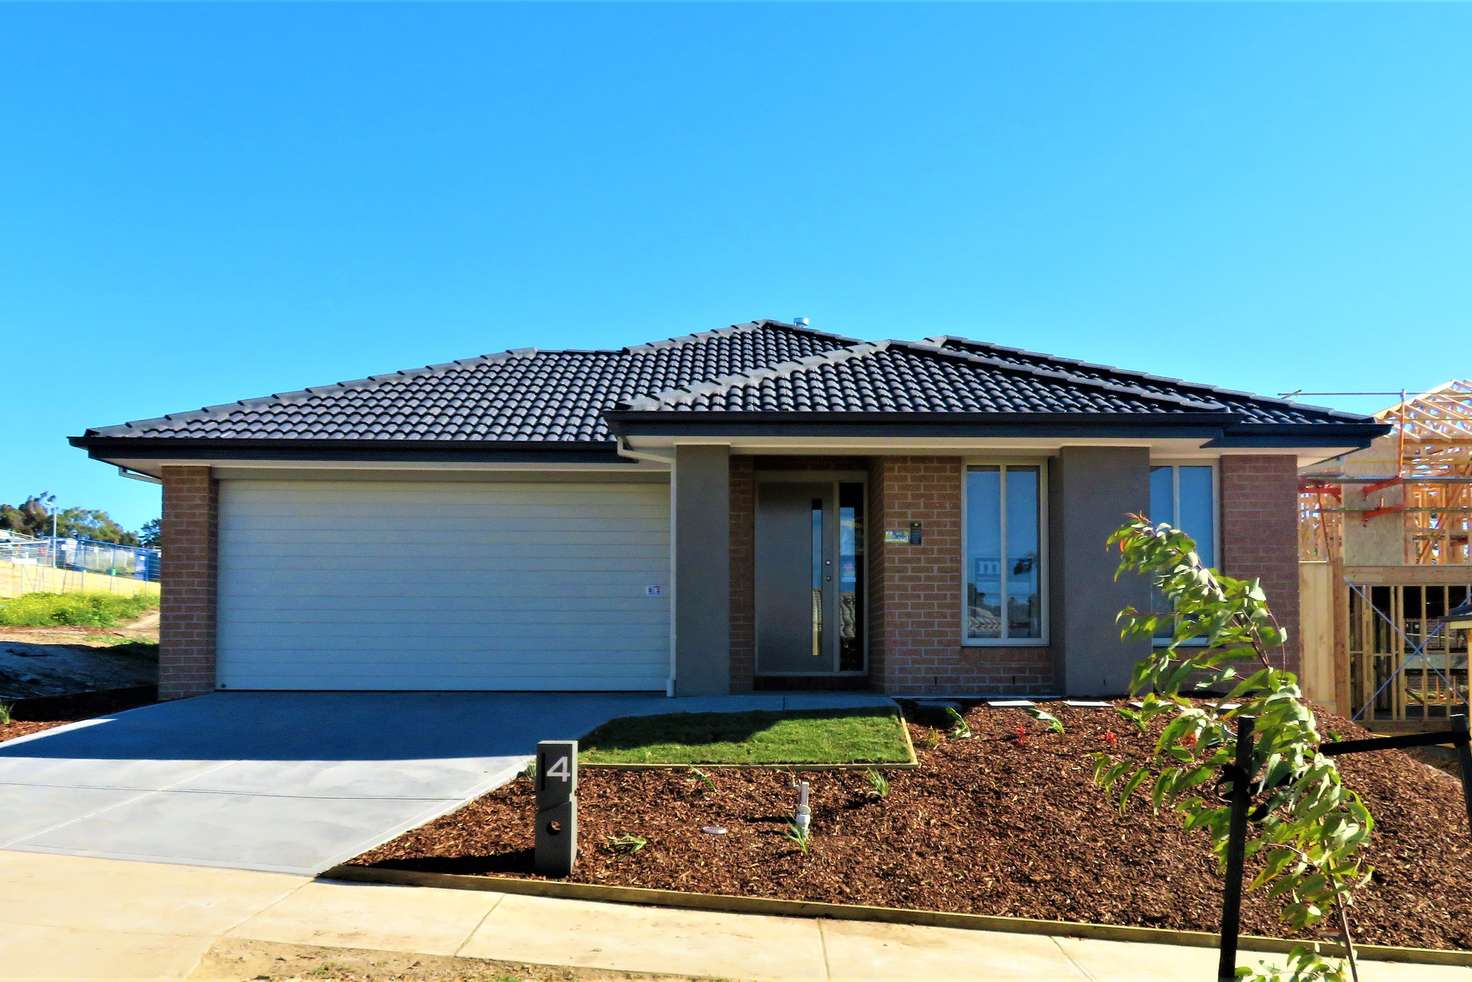 Main view of Homely house listing, 4 Throssell Street, Mernda VIC 3754